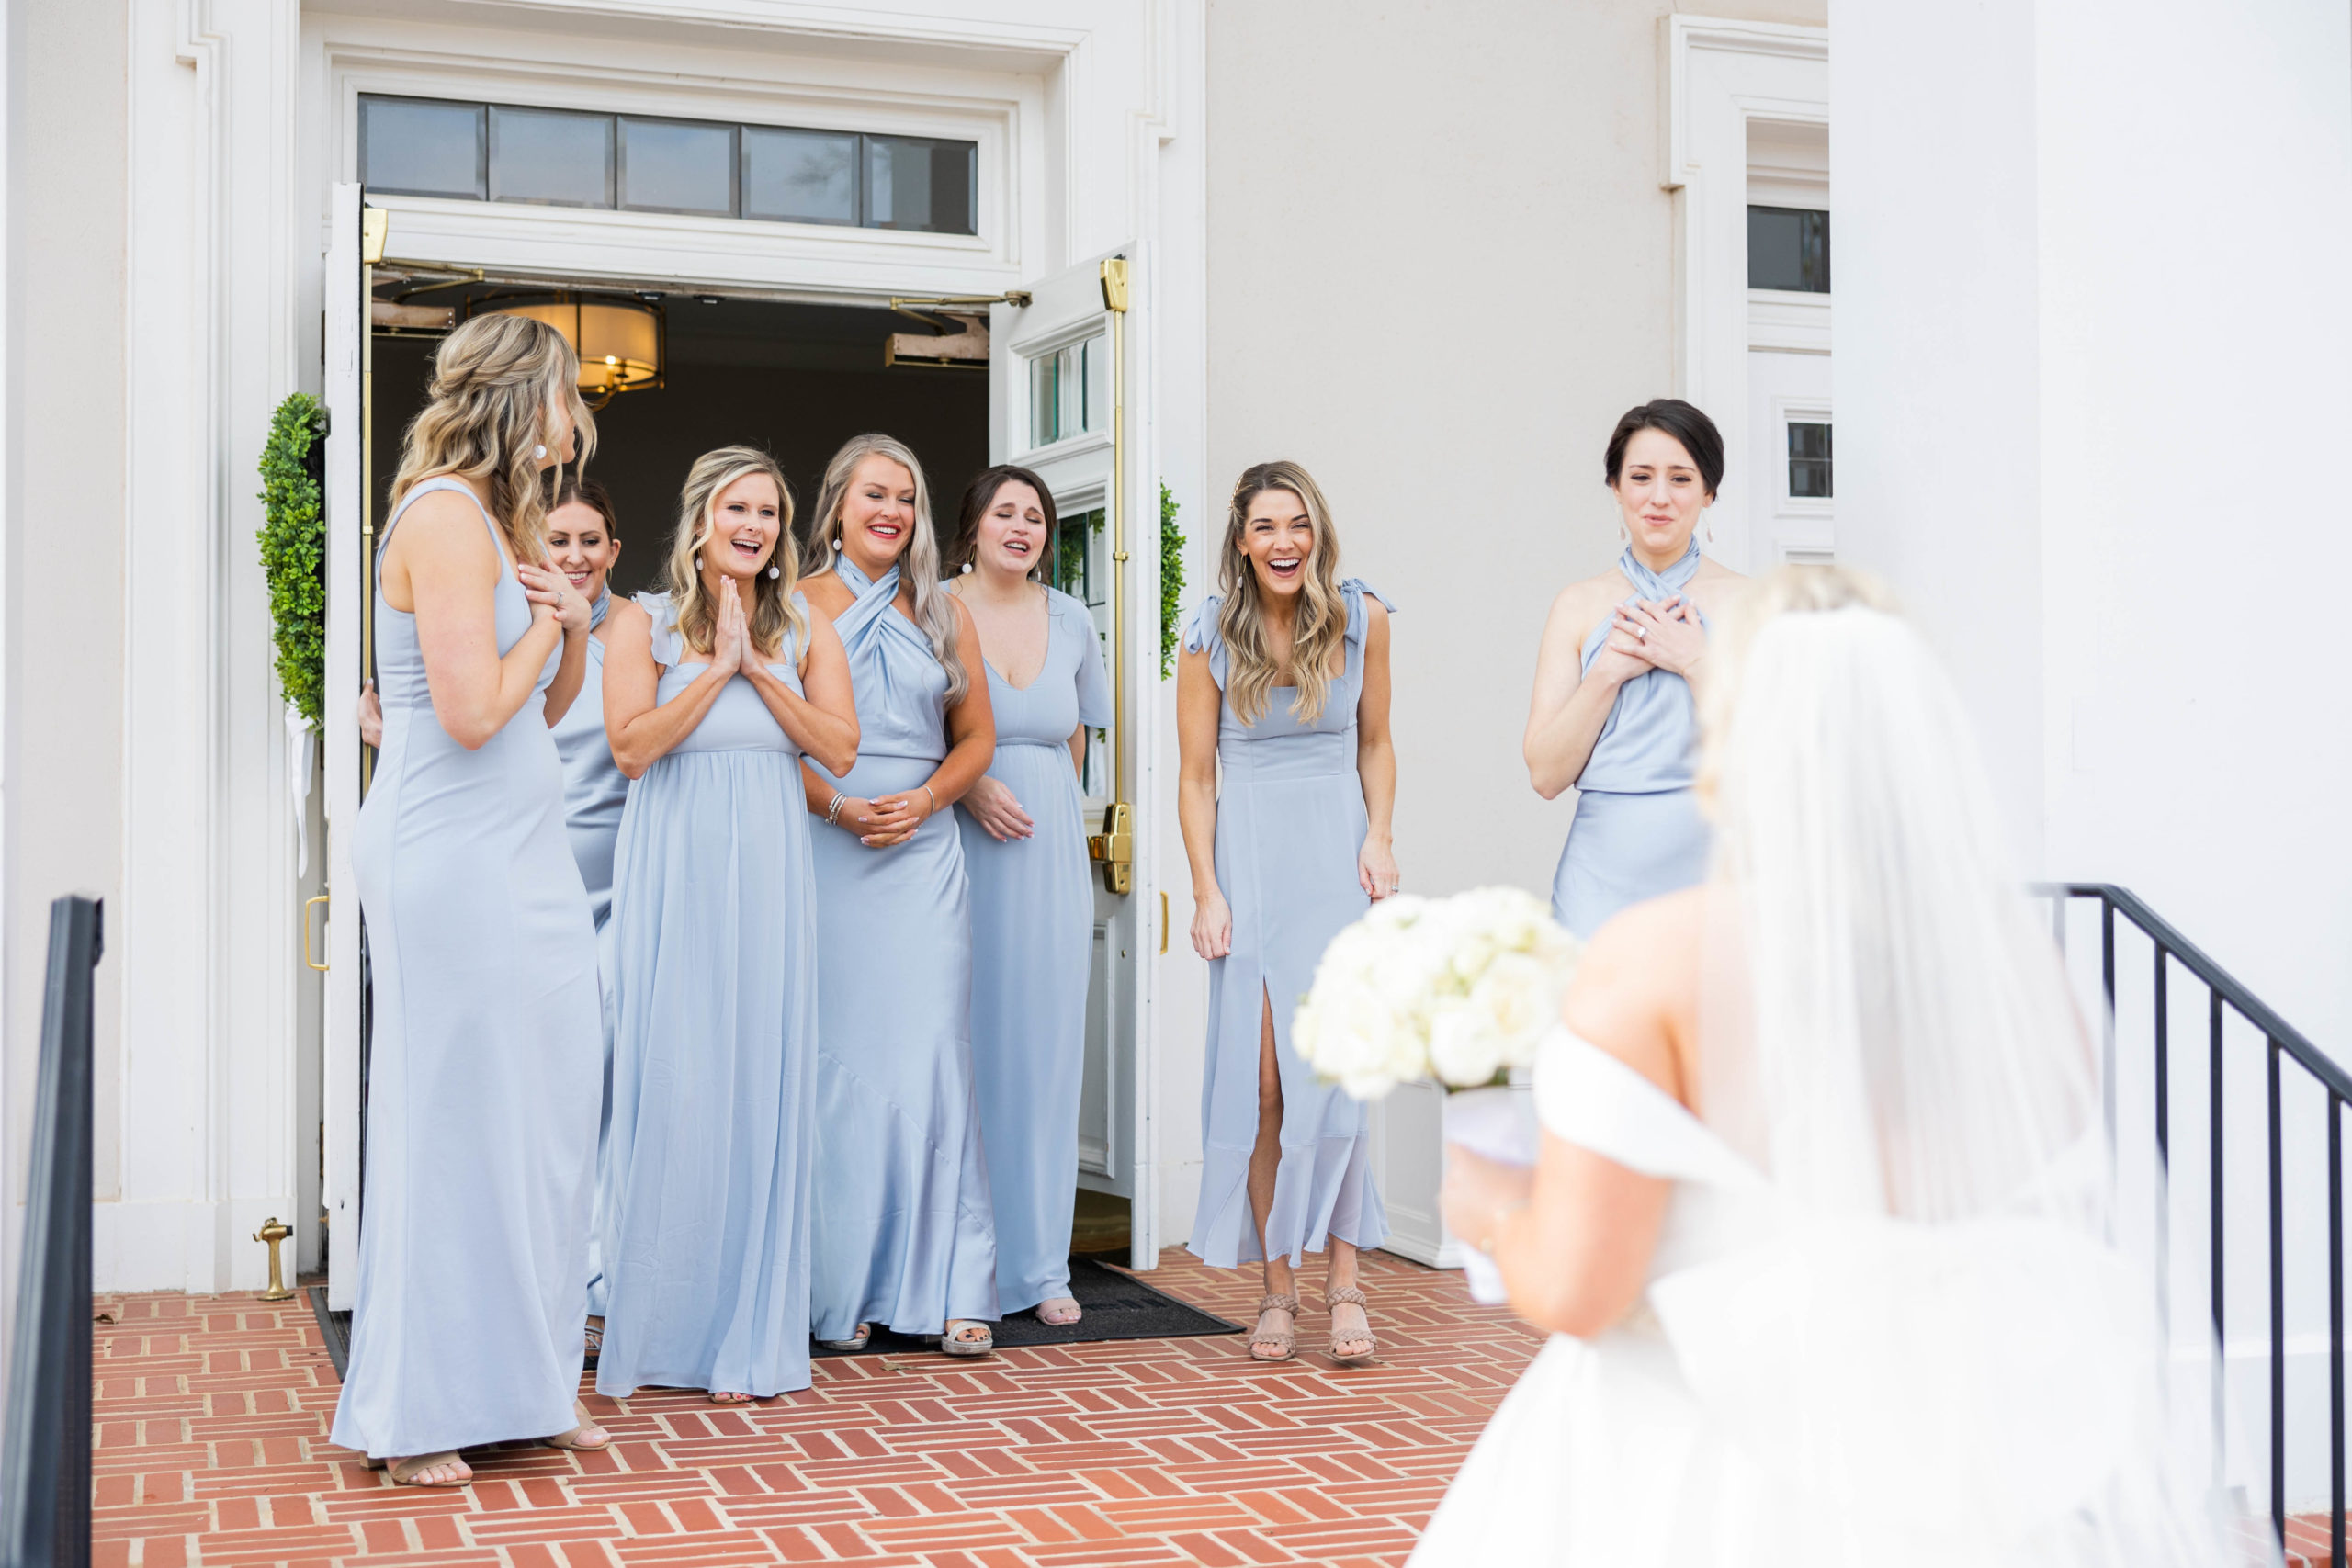 Eleanor Stenner Photography - a Birmingham, AL wedding photographer - shares tips on how to look after yourself while wedding planning!